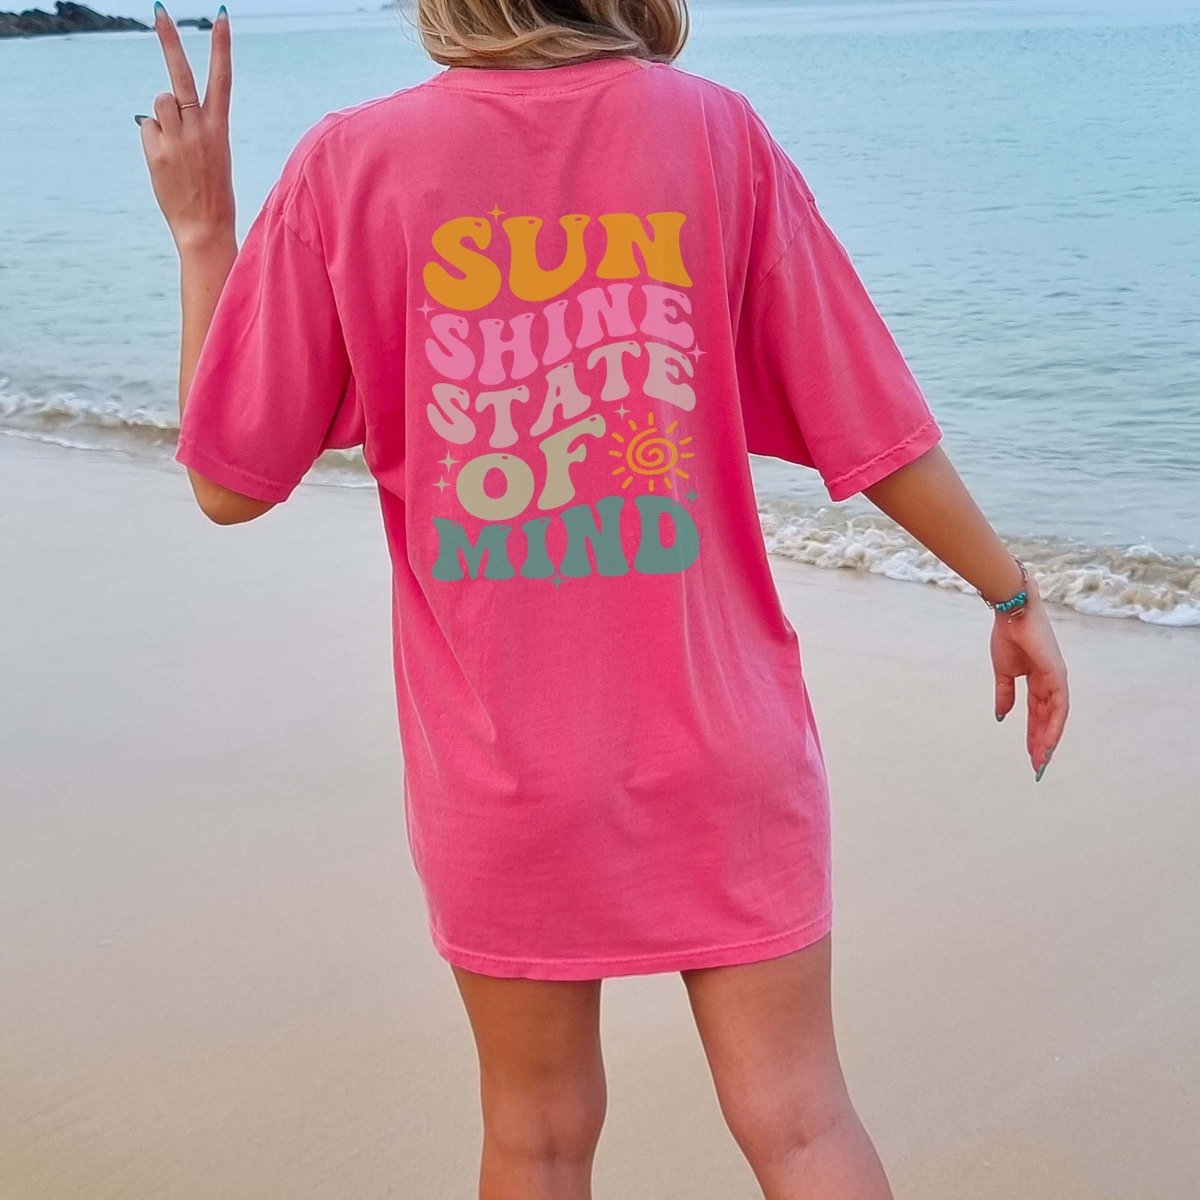 Sunshine State of Mind * Back Graphic * Comfort Color - Limeberry Designs T-Shirt 2XLarge / Lagoon